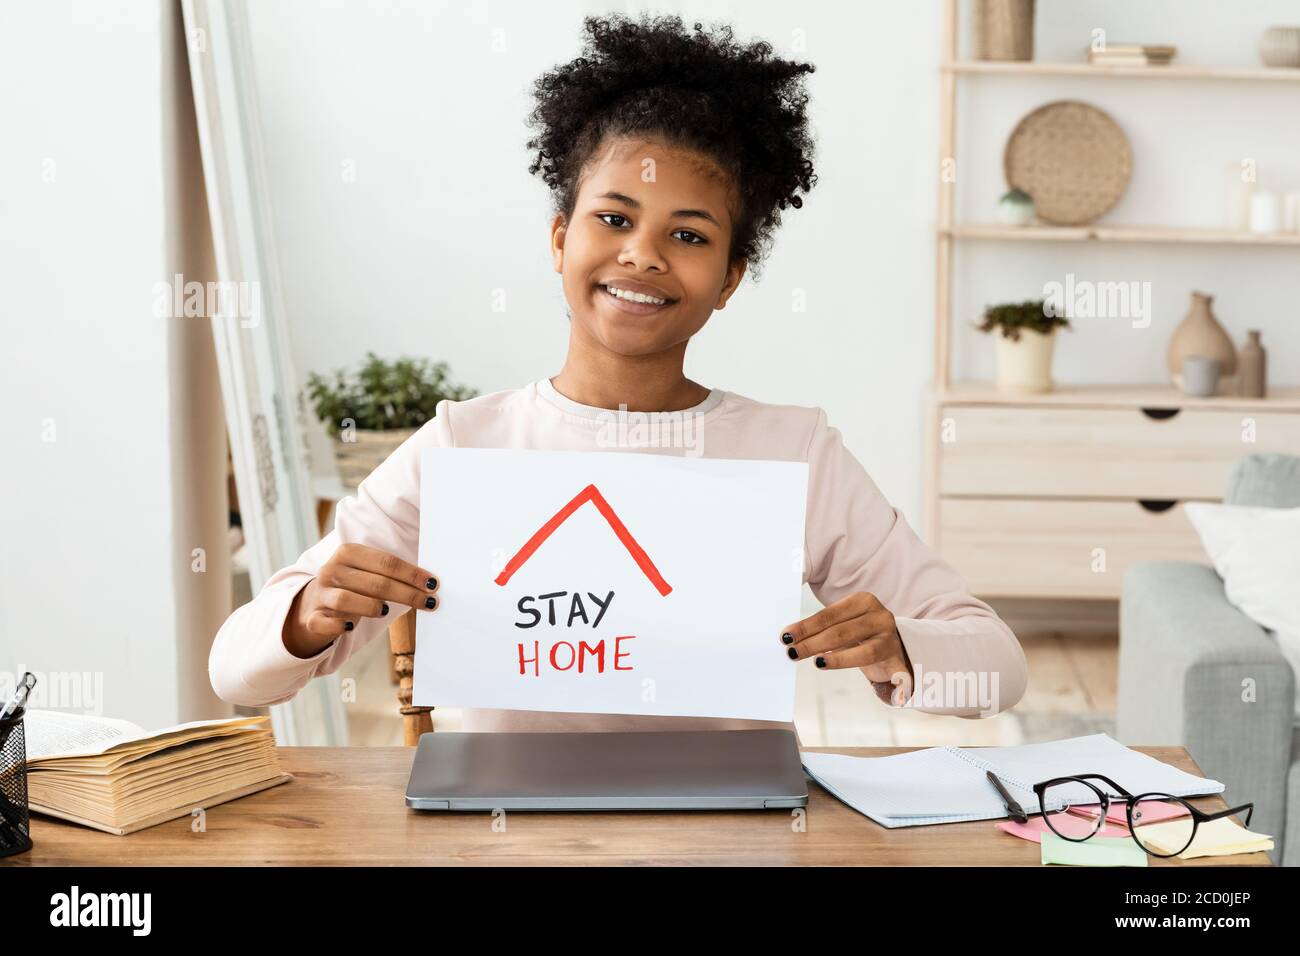 Black School Girl Holding Paper With Stay-At-Home Text Sitting Indoors Stock Photo